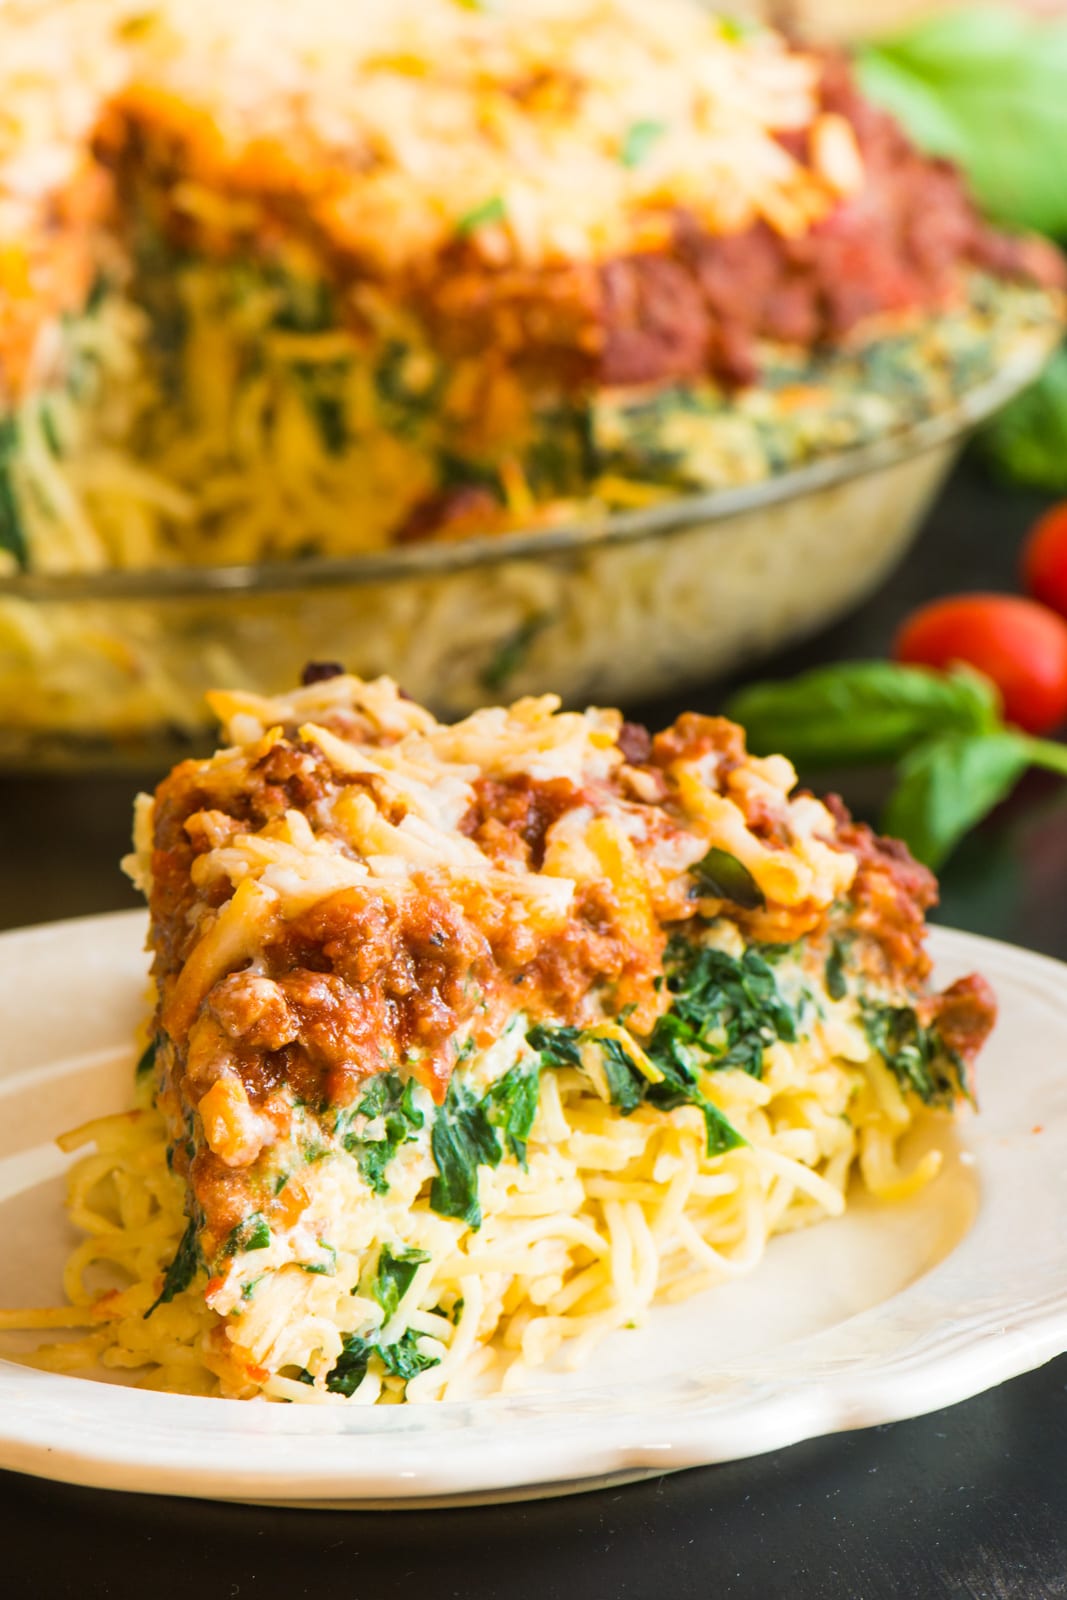 A slice of vegan spaghetti pie sits on a plate. You can see layers of spaghetti, spinach, red sauce, and melted cheese on the top. Behind it is the entire dish with a slice removed. There's fresh basil and tomatoes beside it.